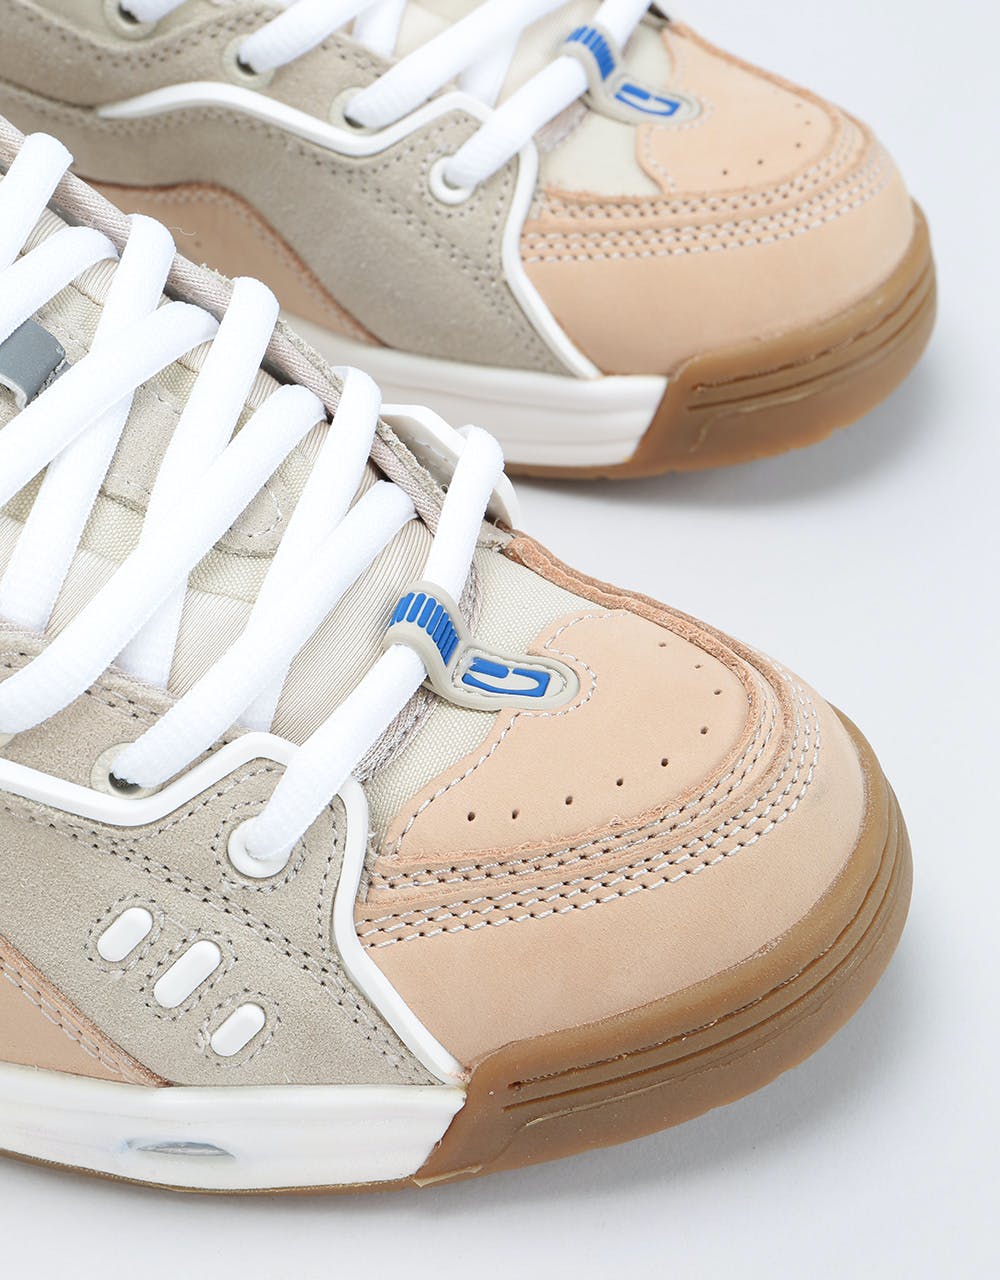 Globe CT IV Classic Skate Shoes - Oyster/Grey/Gum